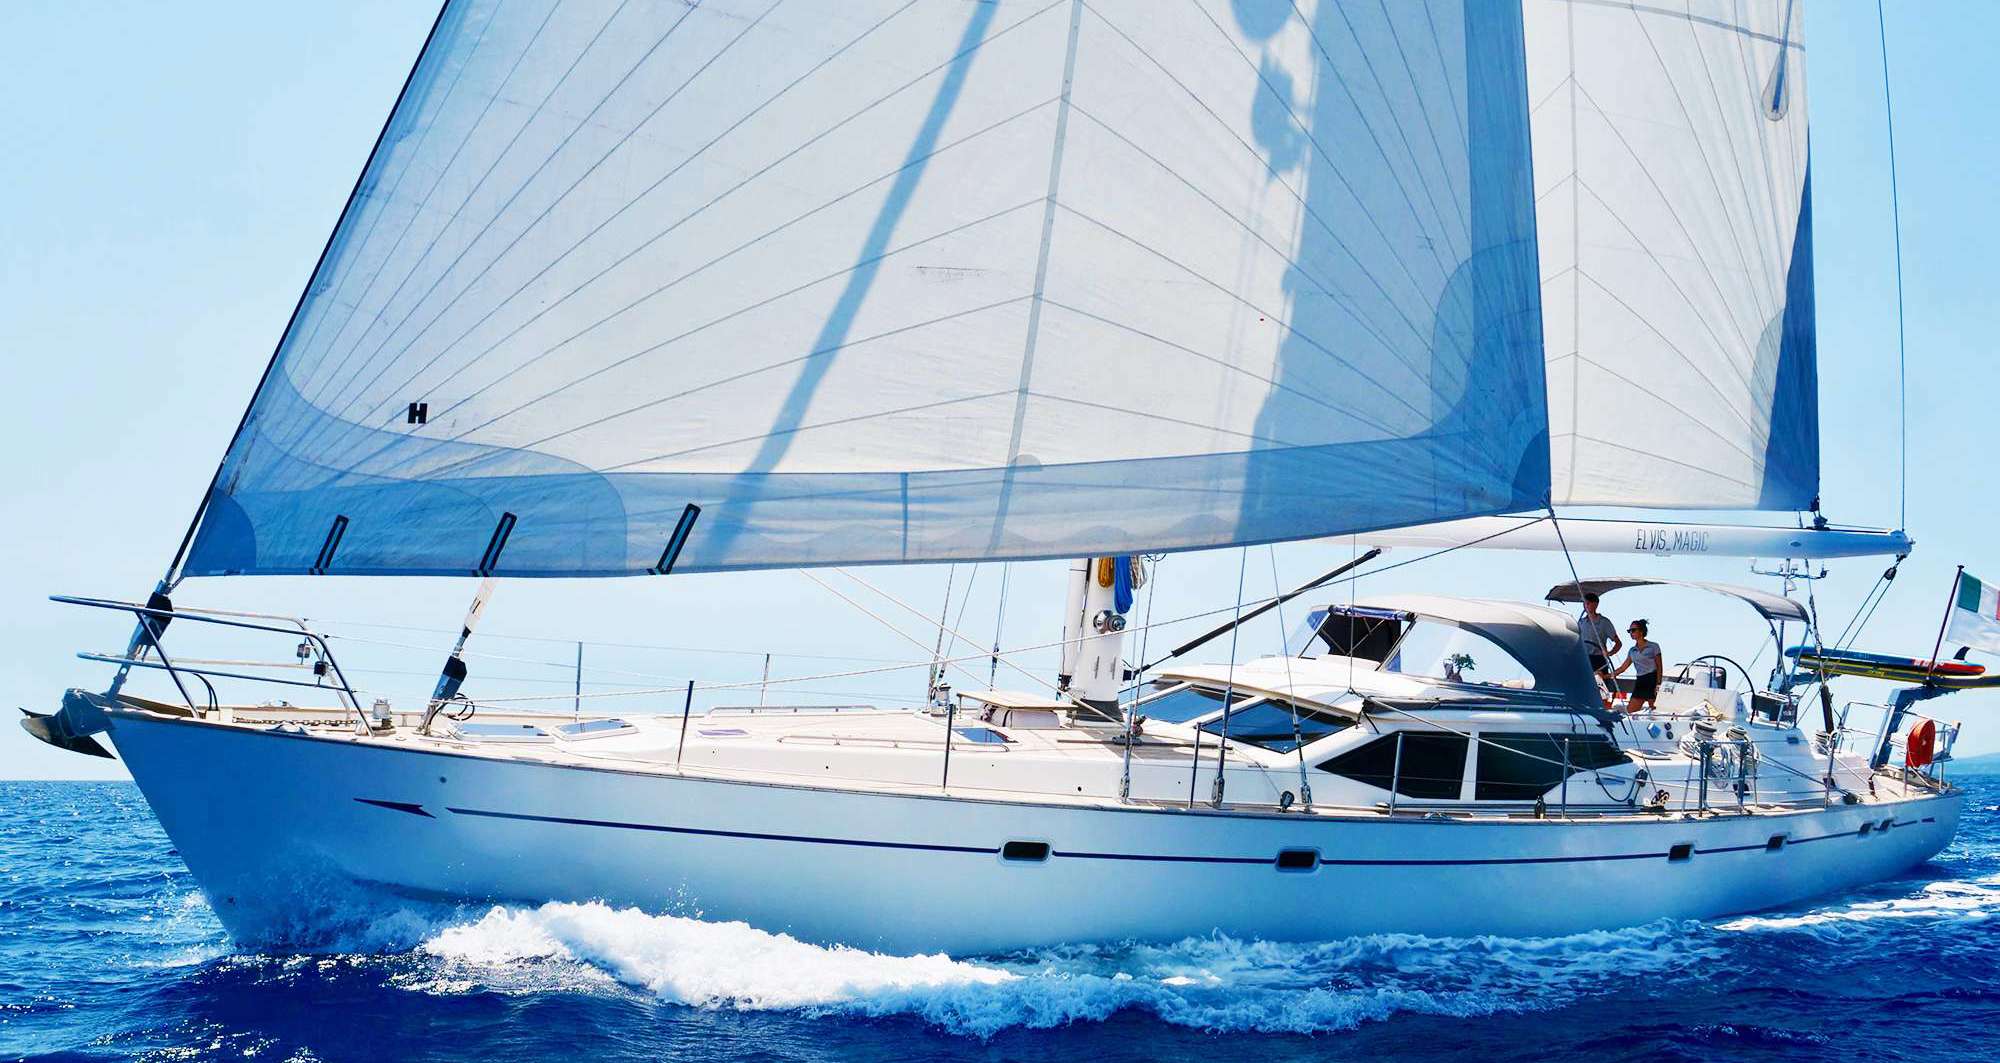 Sailing Yacht 'ELVIS MAGIC', 6 PAX, 2 Crew, 66.00 Ft, 20.00 Meters, Built 2003, Oyster Marine, Refit Year 2012 - Main engine - Perkins Sabre 225ti 2016 - Generator - Northern lights 11kw, Bow thruster hydraulic motor and blades 2017 - Rig pulled and servi